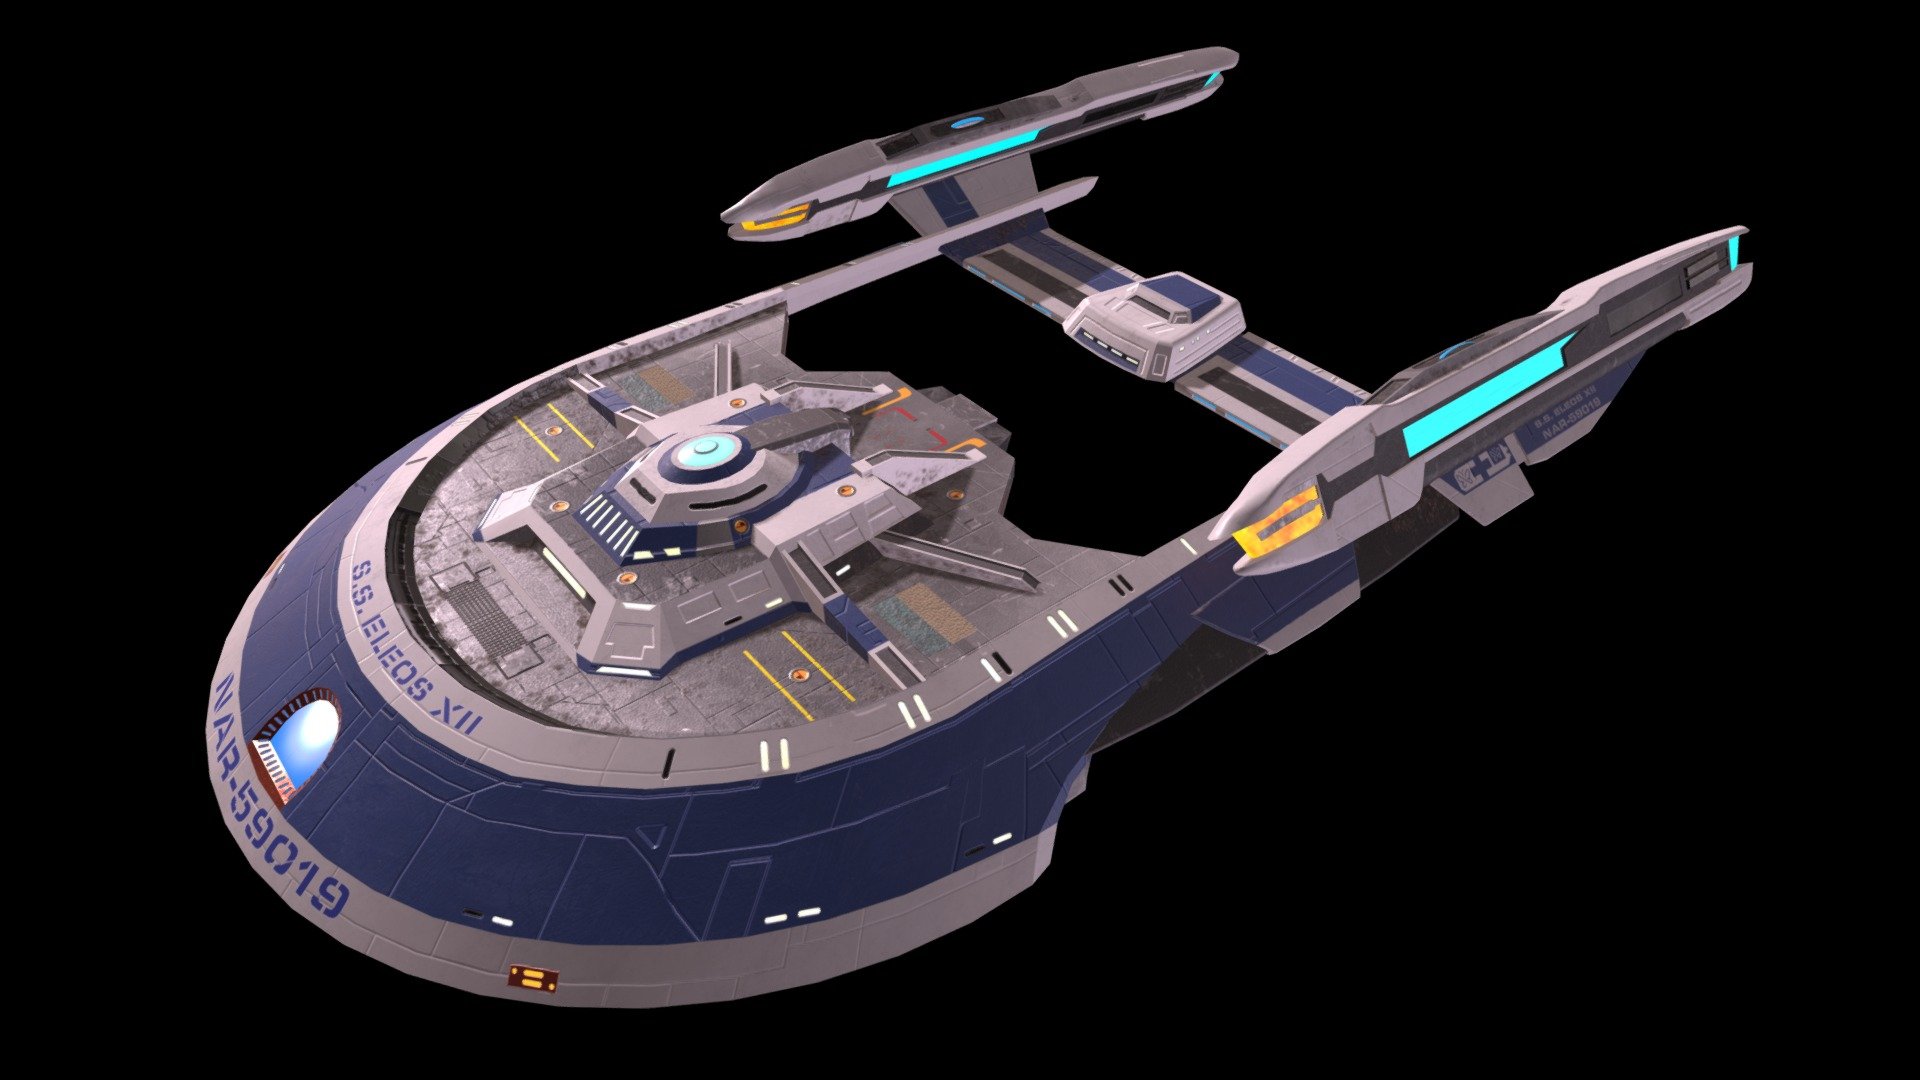 My 3D model of the Phoenix-Class SS Eleos XII starship as seen in Star Trek: Picard  season 3. Based on an original design by by John Eaves.

You can purchase it here: https://ko-fi.com/s/8d33ae302e - SS Eleos XII (Star Trek: Picard) - 3D model by Pundus Art (@Pundus_Art) 3d model